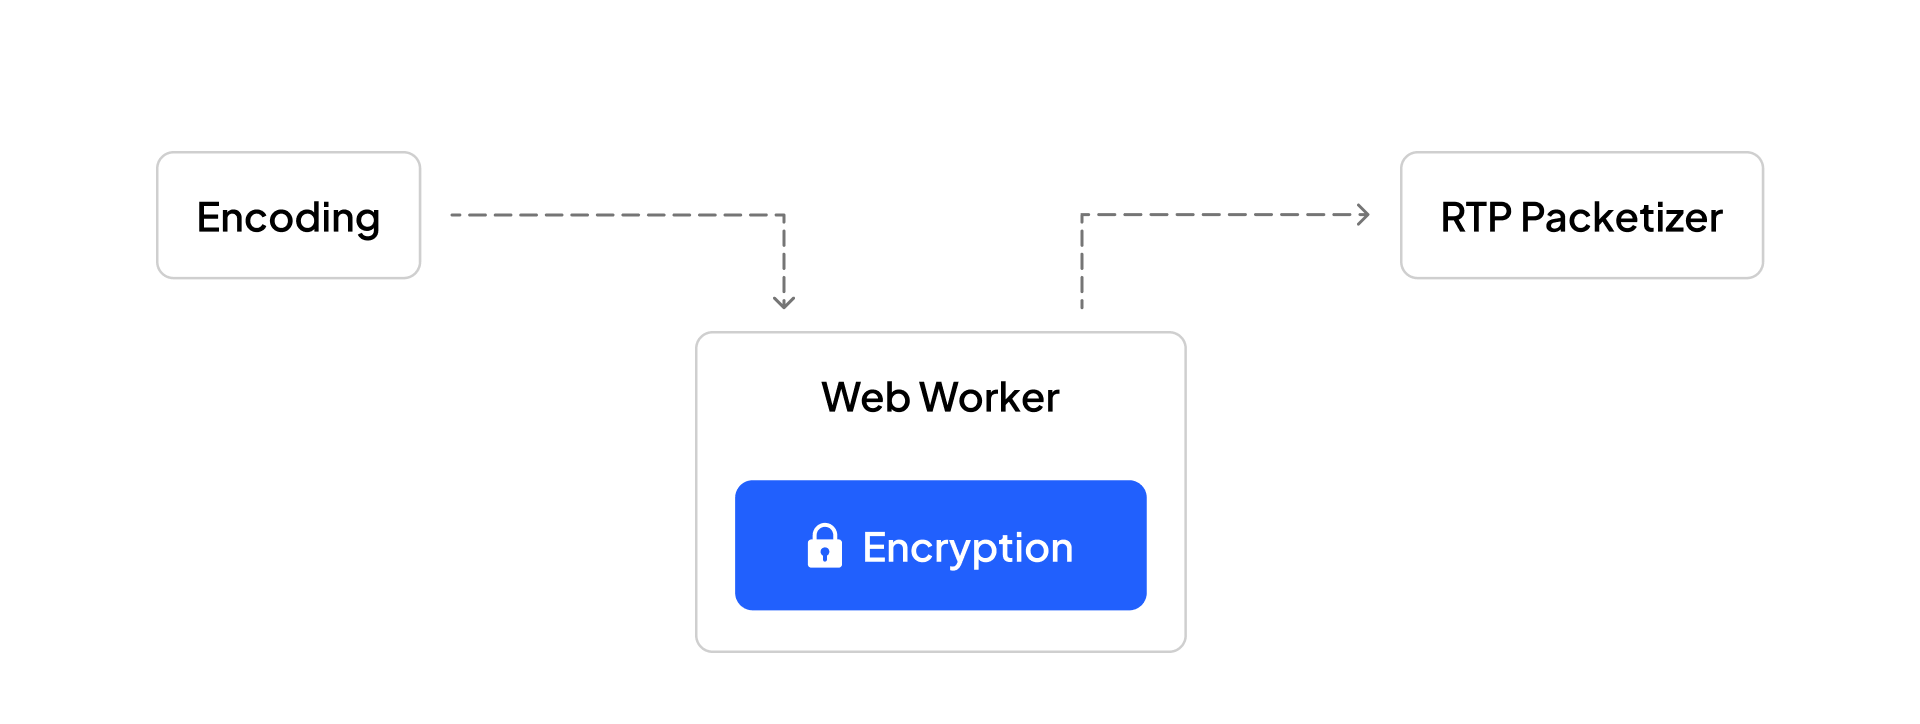 end-to-end encryption/decryption to a different thread